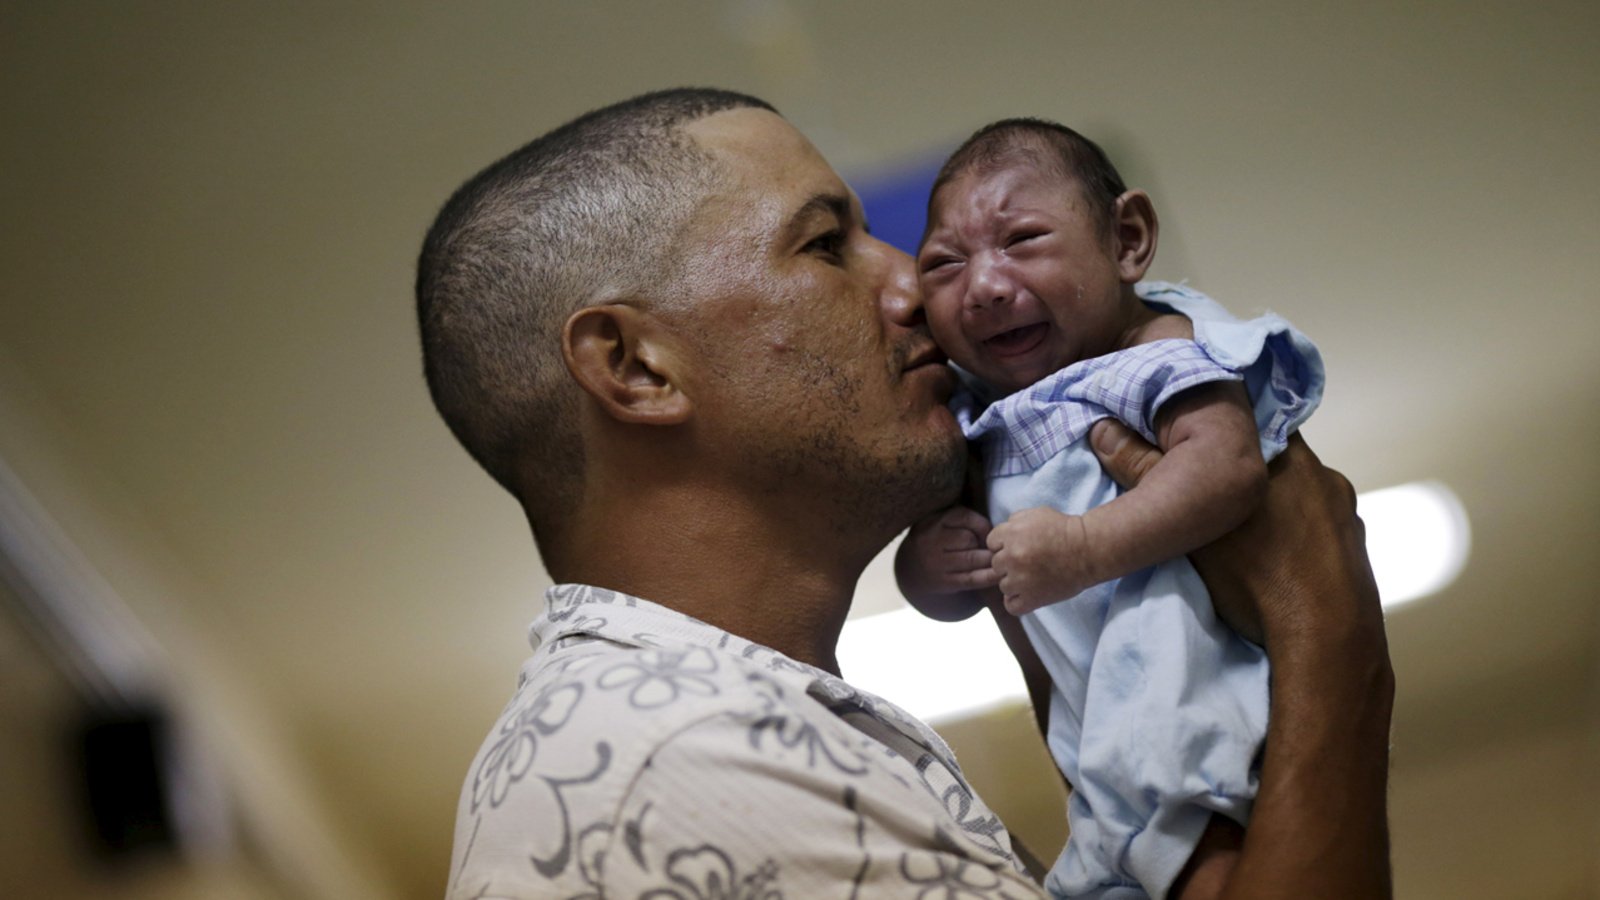 30-facts-about-zika-virus